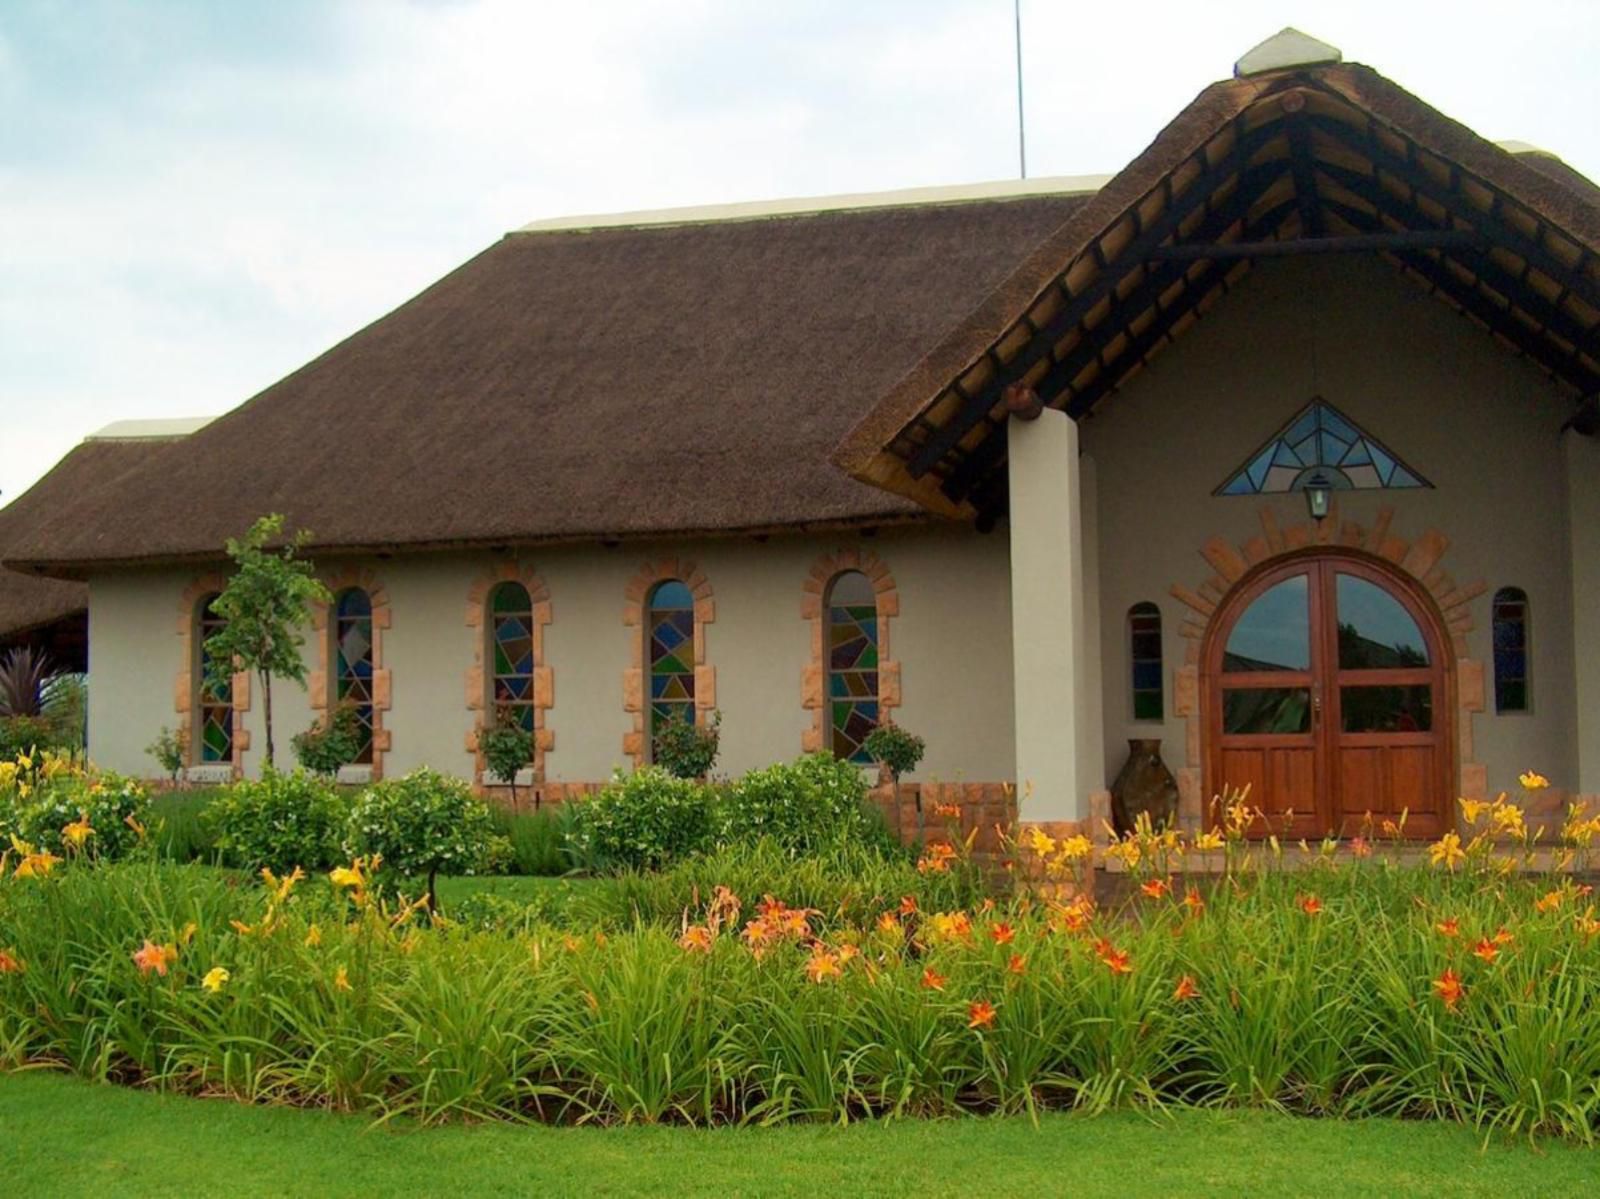 Grasslands Conference And Wedding Venue Bethal Mpumalanga South Africa House, Building, Architecture, Church, Religion